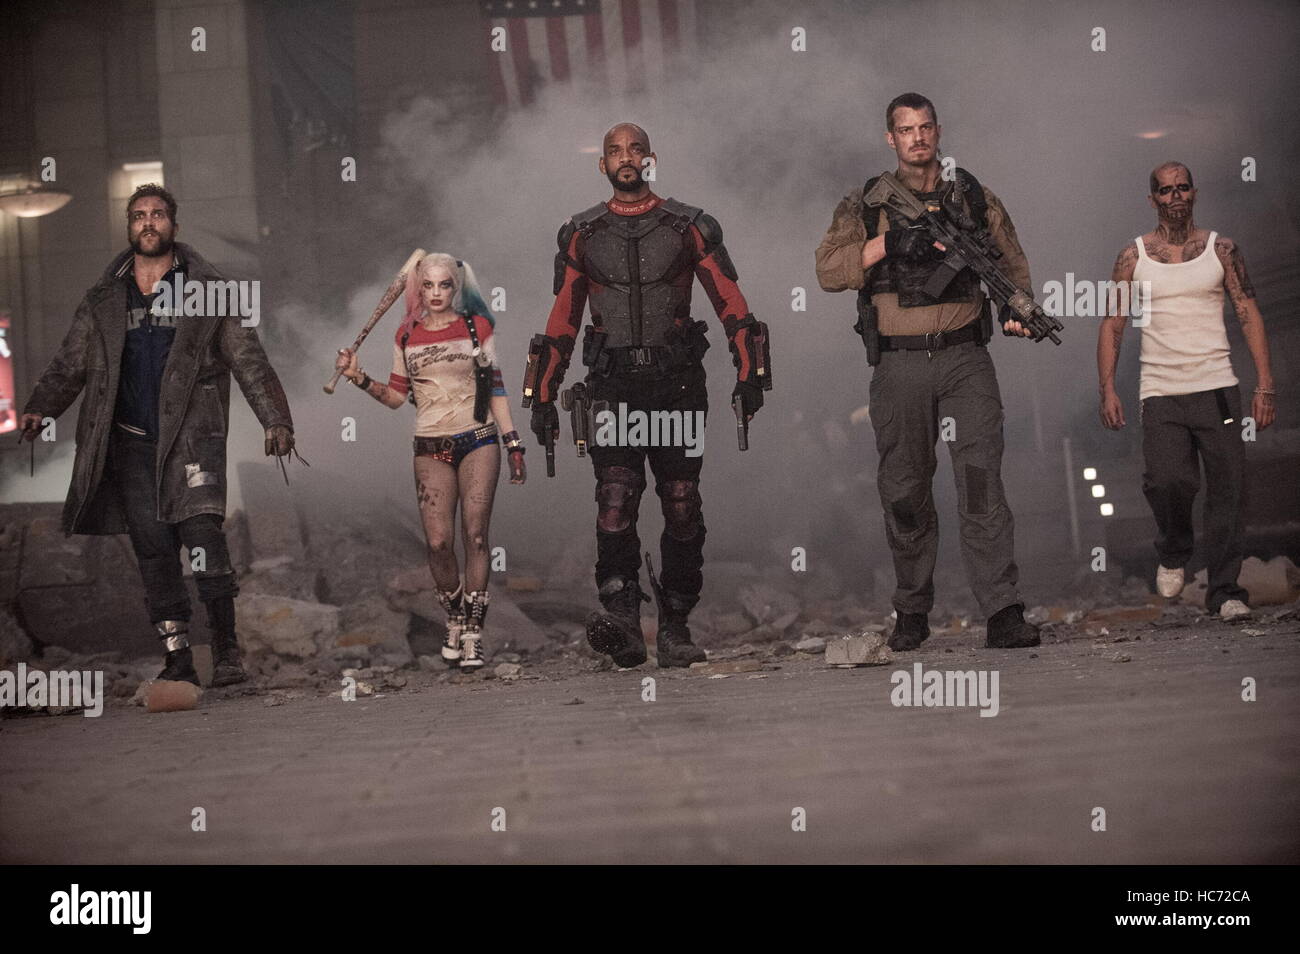 RELEASE DATE: August 5, 2016 TITLE: Suicide Squad STUDIO: Atlas Entertainment DIRECTOR: David Ayer PLOT: A secret government agency recruits imprisoned supervillains to execute dangerous black ops missions in exchange for clemency STARRING: JAI COURTNEY as Boomerang, WILL SMITH as Deadshot, MARGOT ROBBIE as Harley Quinn, DEWALE AKINNUOYE-AGBAJE as Killer Croc, JOEL KINNAMAN as Rick Flagg (Credit Image: c Atlas Entertainment/Entertainment Pictures/) Stock Photo